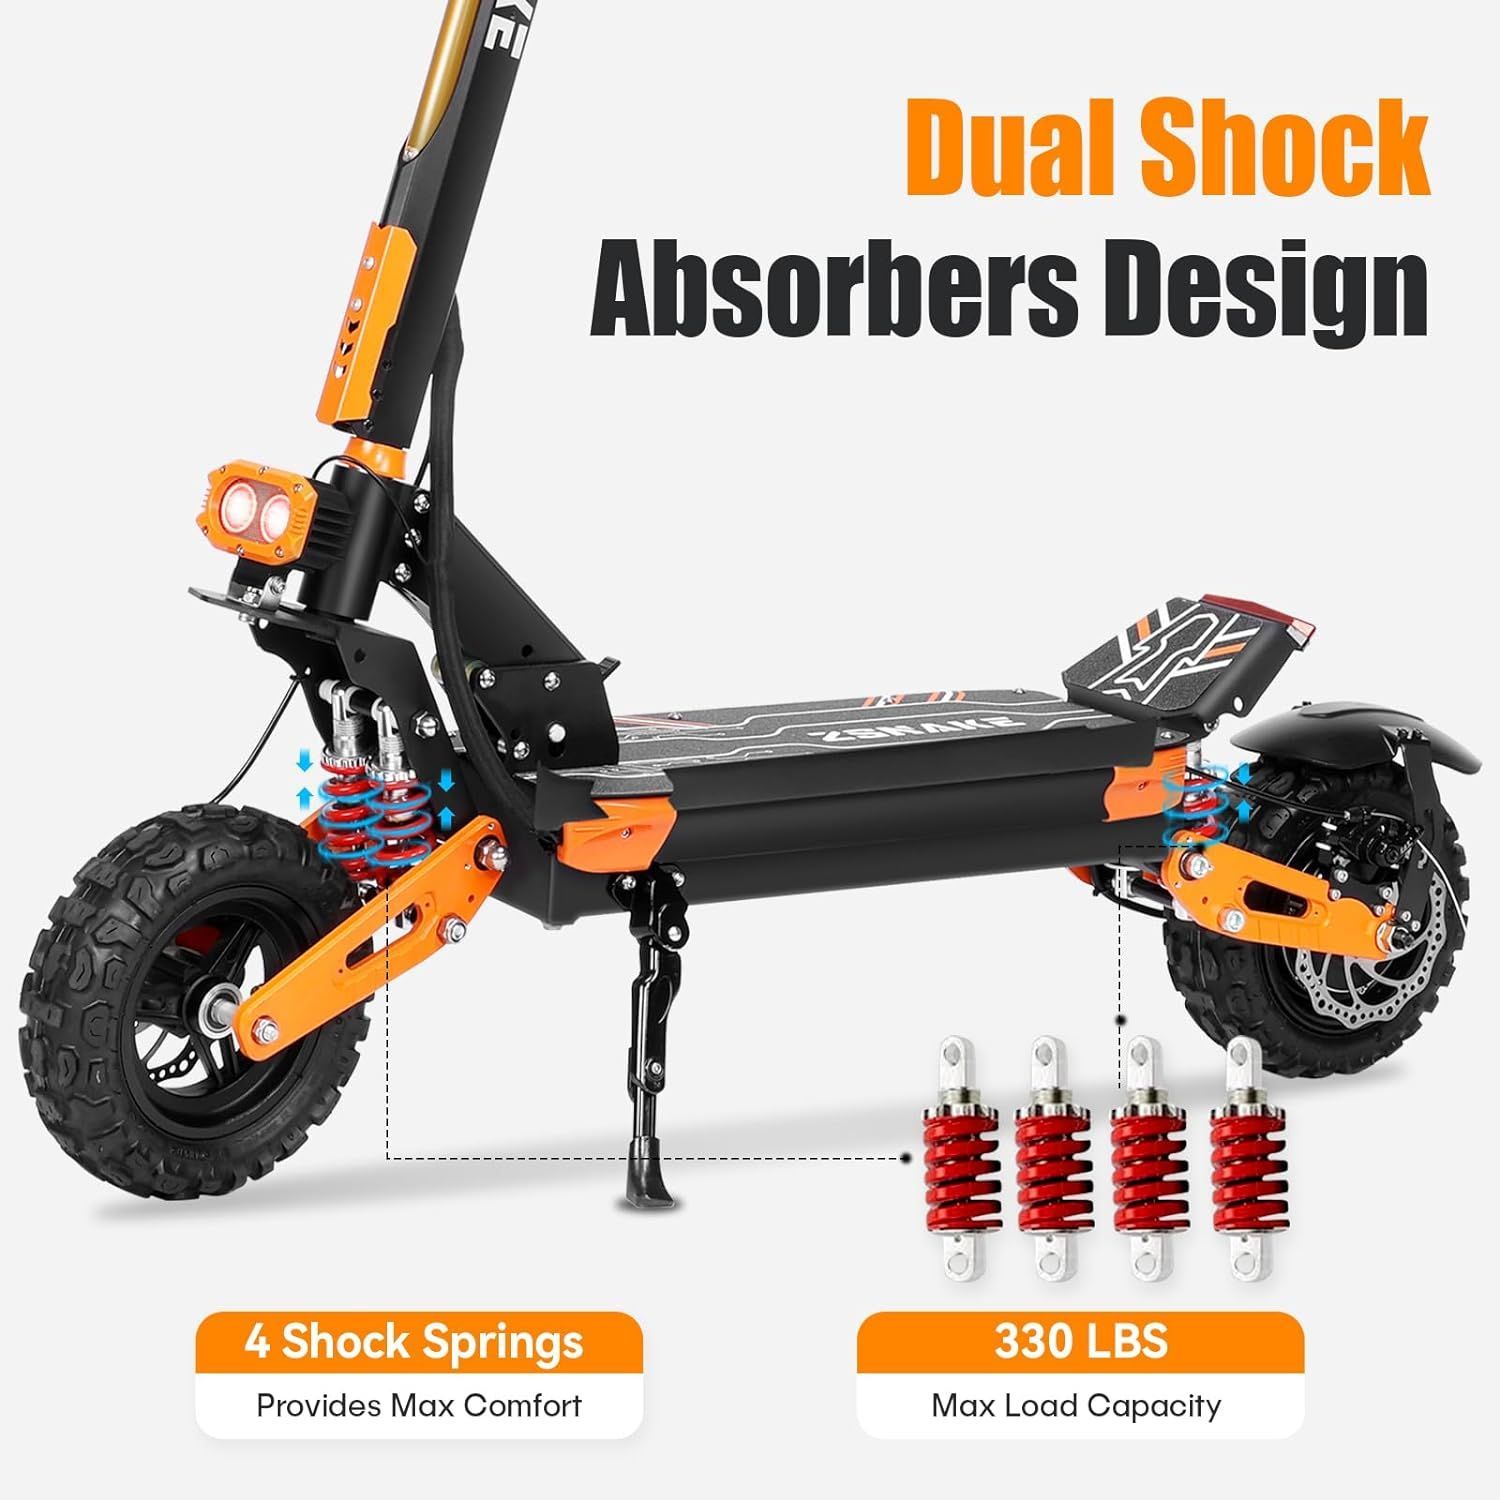 a dual shock absorbers design electric scooter with 4 shock springs and 330 lbs max load capacity .